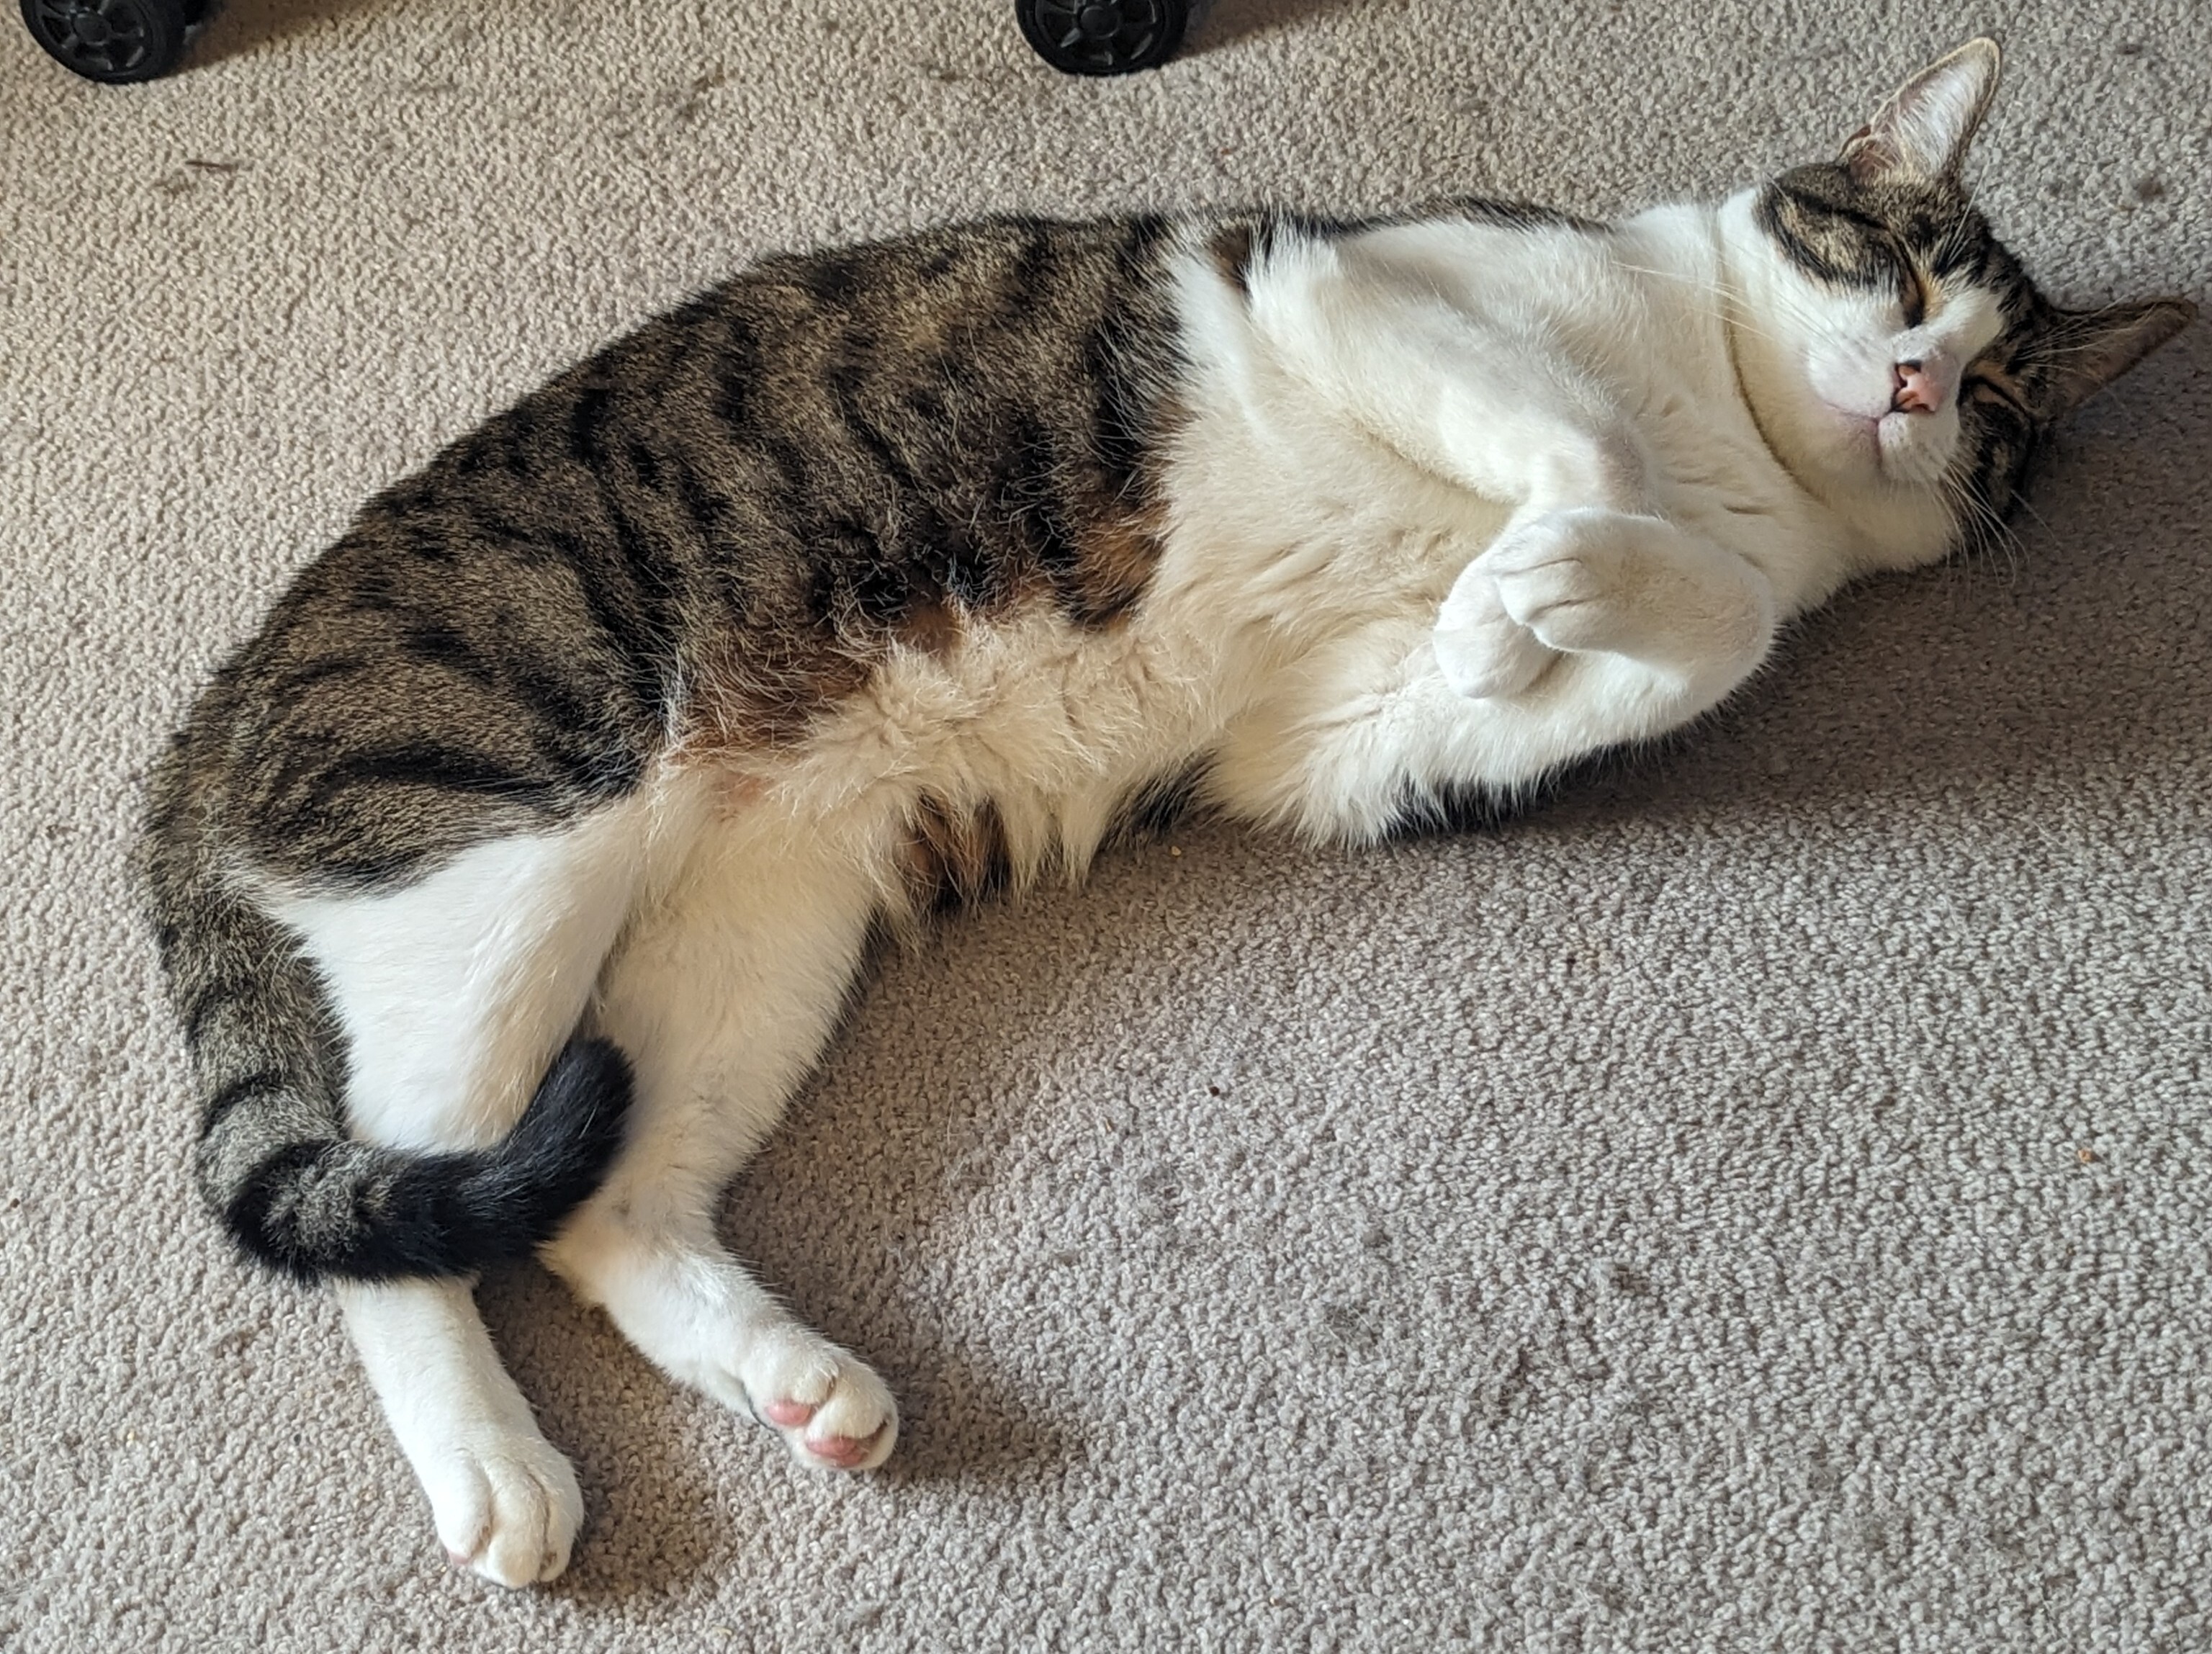 tabby and white cat showing belly and sleeping